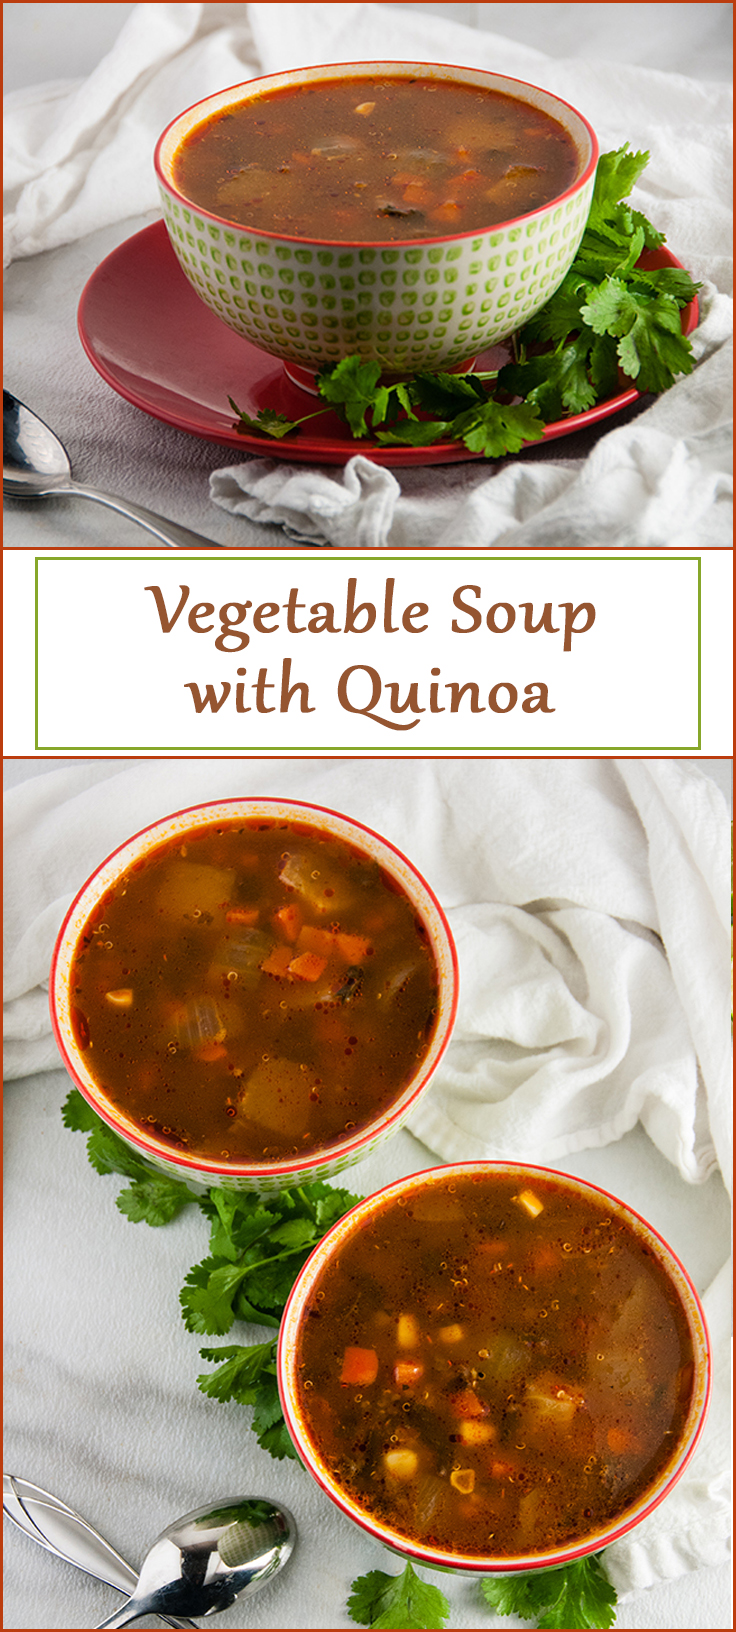 Vegetable Soup with Quinoa from www.SeasonedSprinkles.com